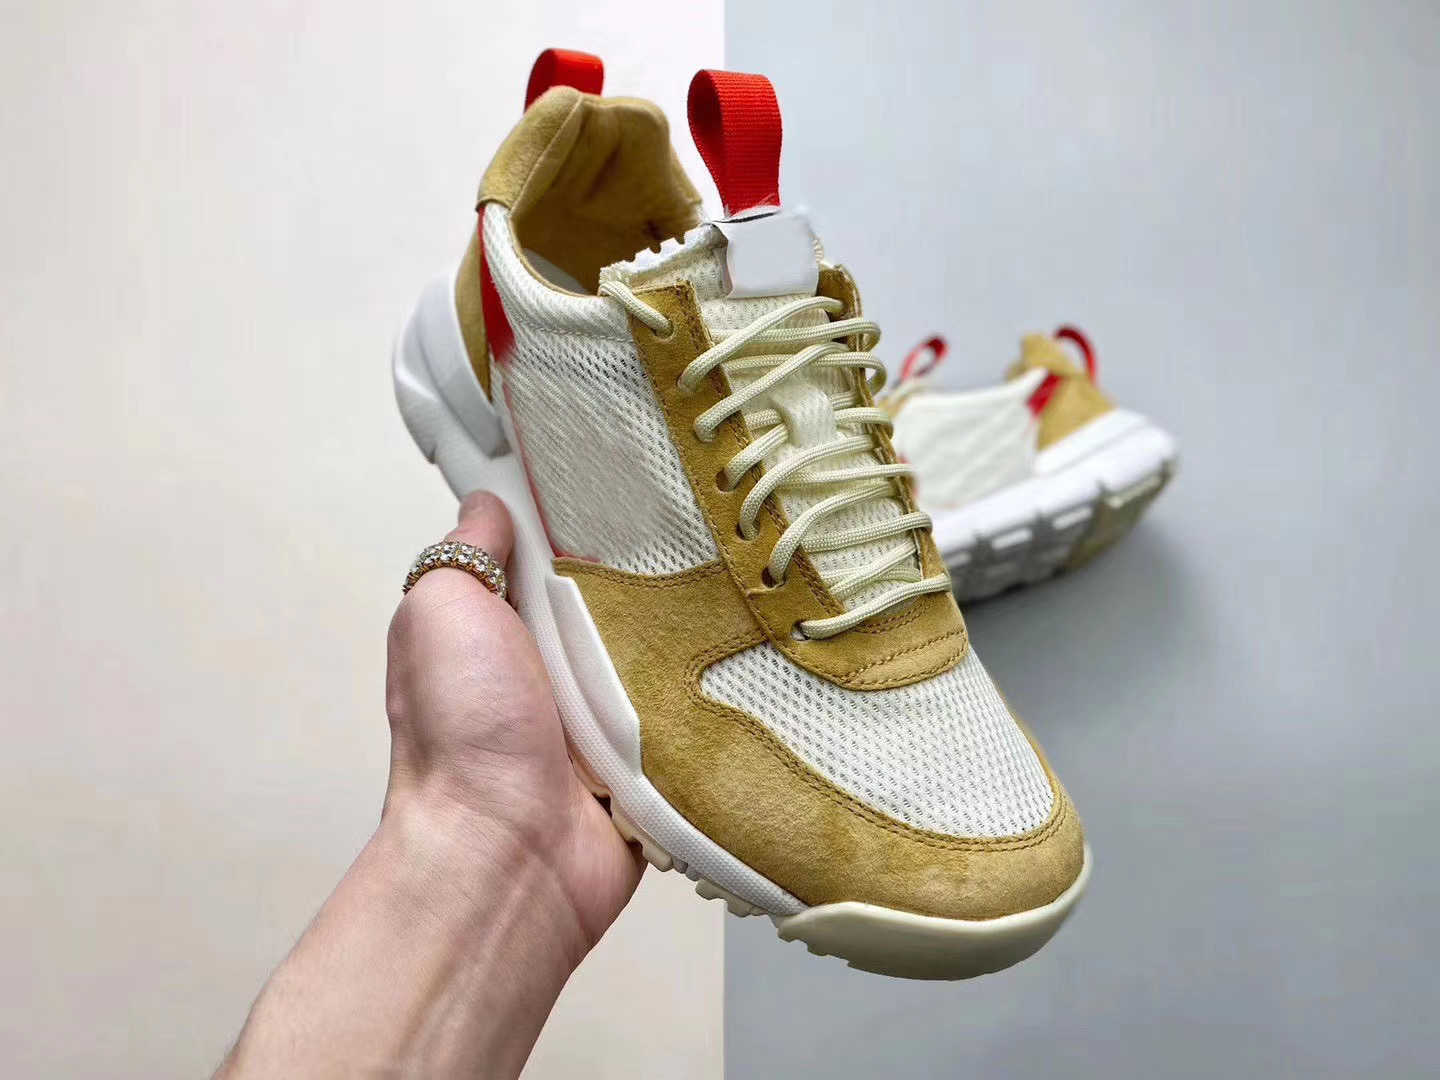 

2021 Released Tom Sachs x Craft Mars Yard 2.0 Ts Joint Limited Sneaker Natural Sport Red Maple Authentic Outdoor Shoes with Original Box, Tom sachs x mars yard 2.0